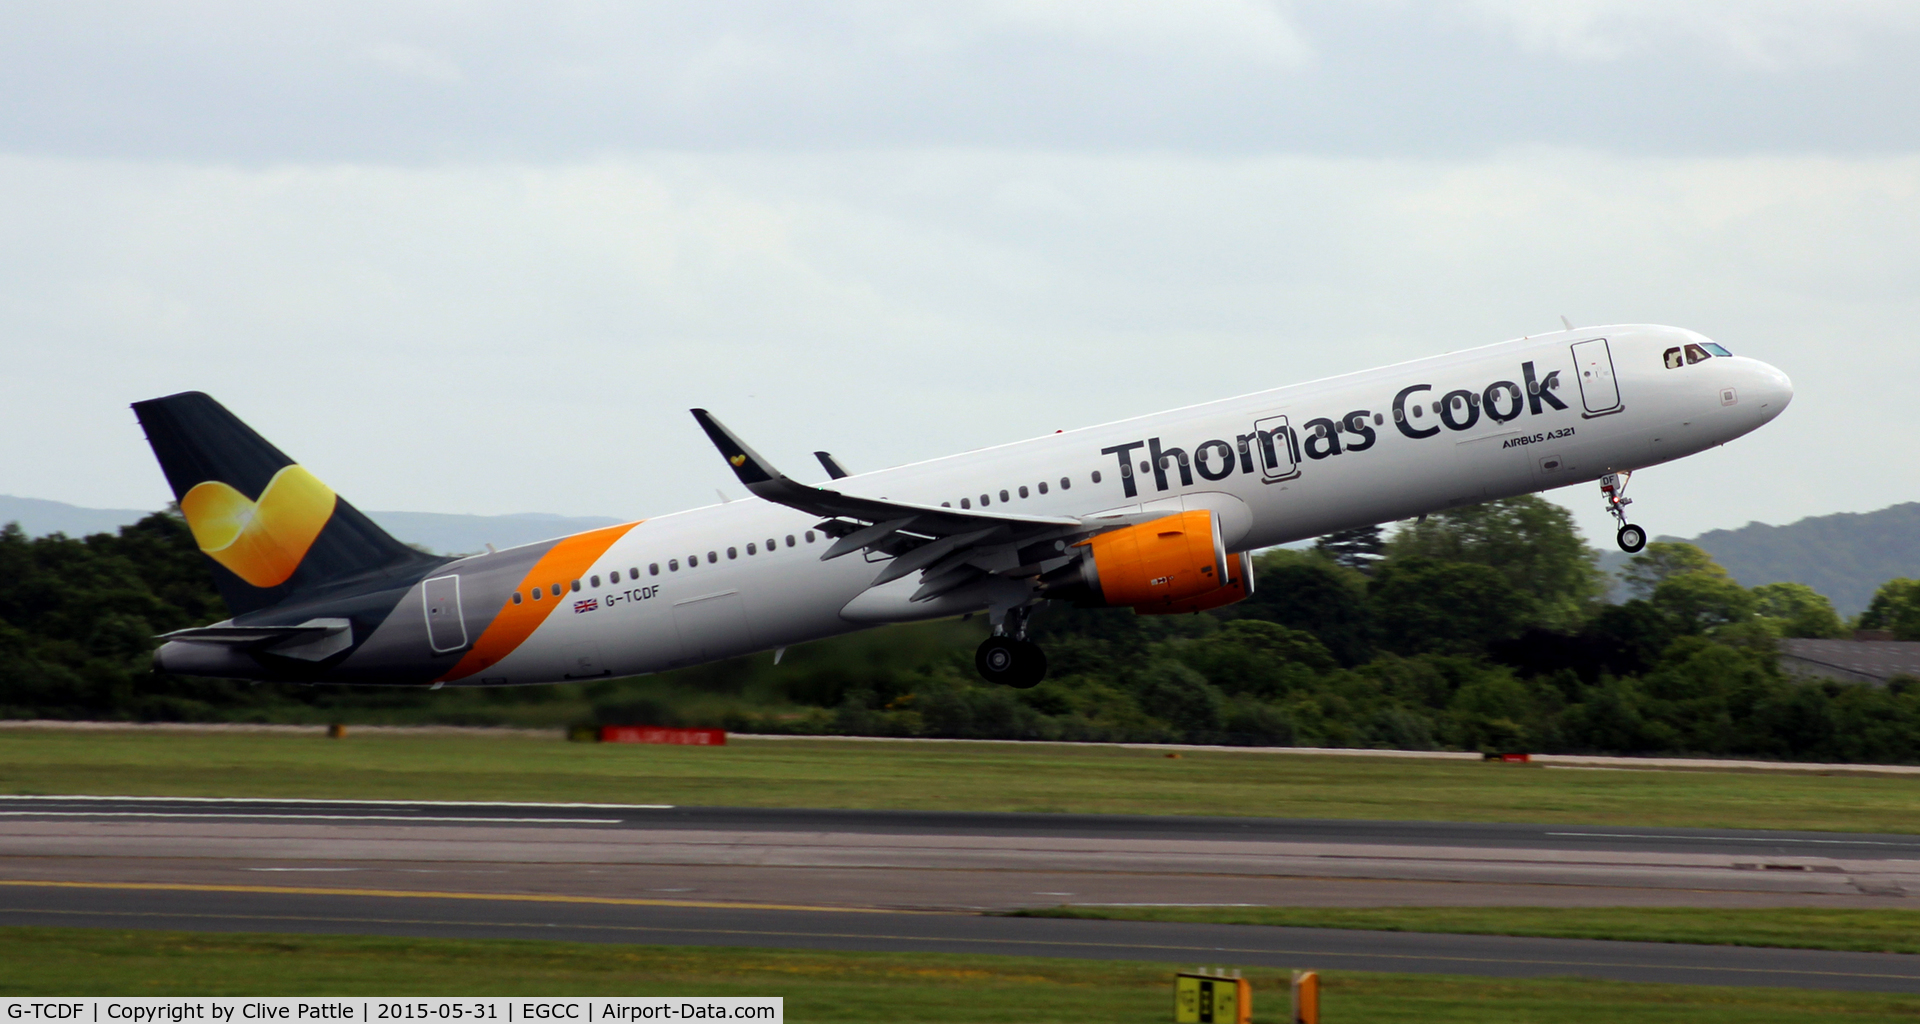 G-TCDF, 2014 Airbus A321-211 C/N 6114, In action at Manchester EGCC